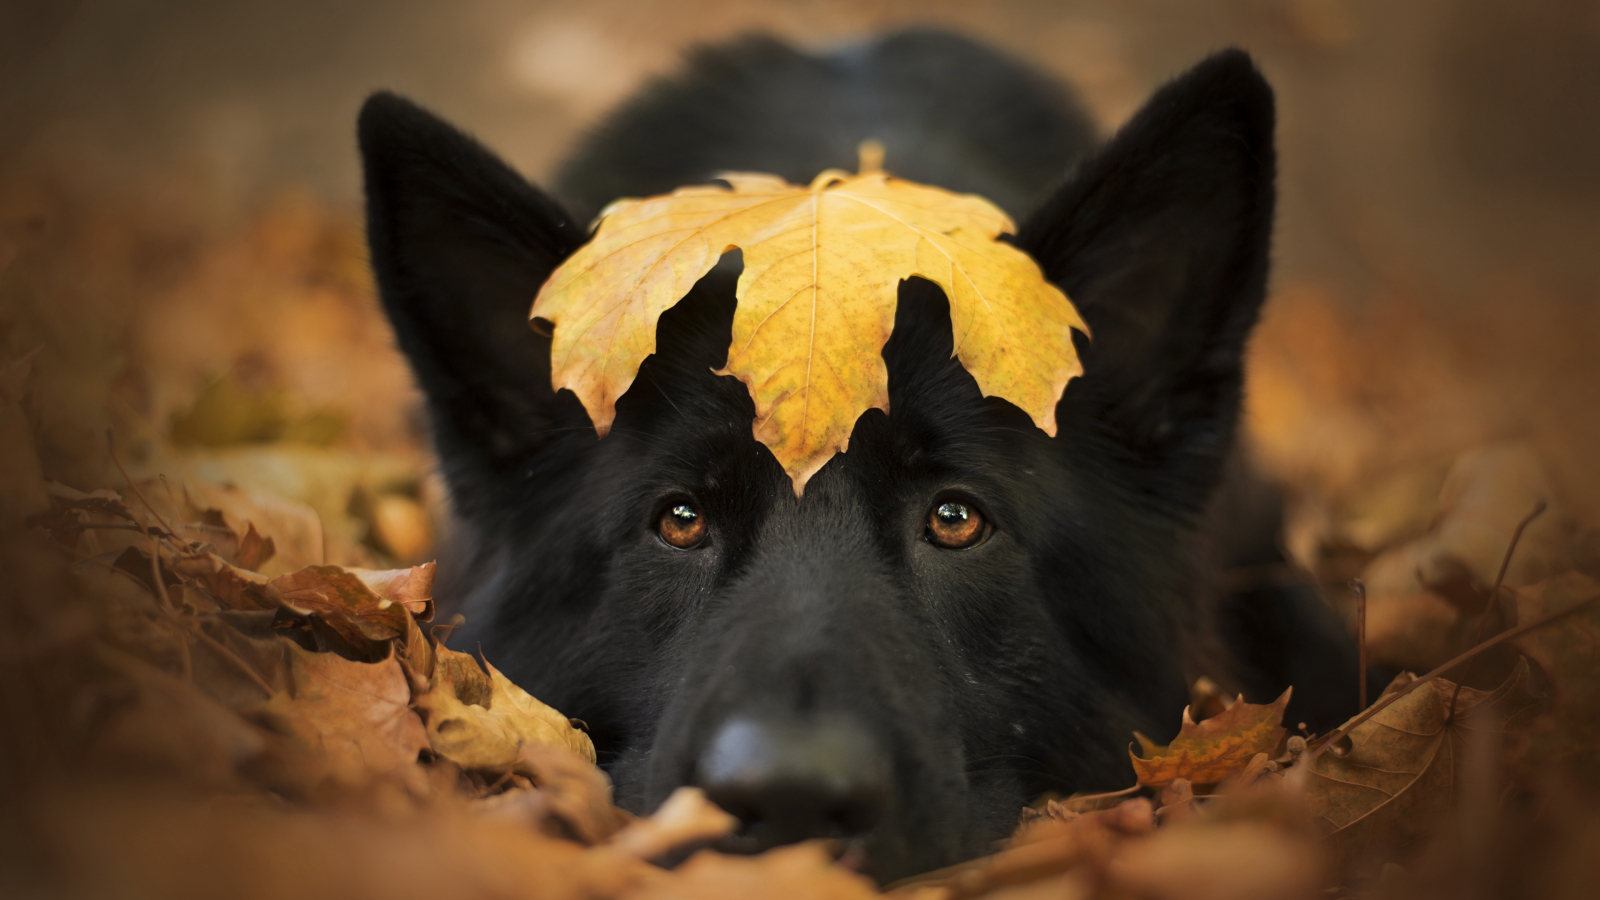 Dog and autumn, cute stare, close up, 1600x900 wallpaper